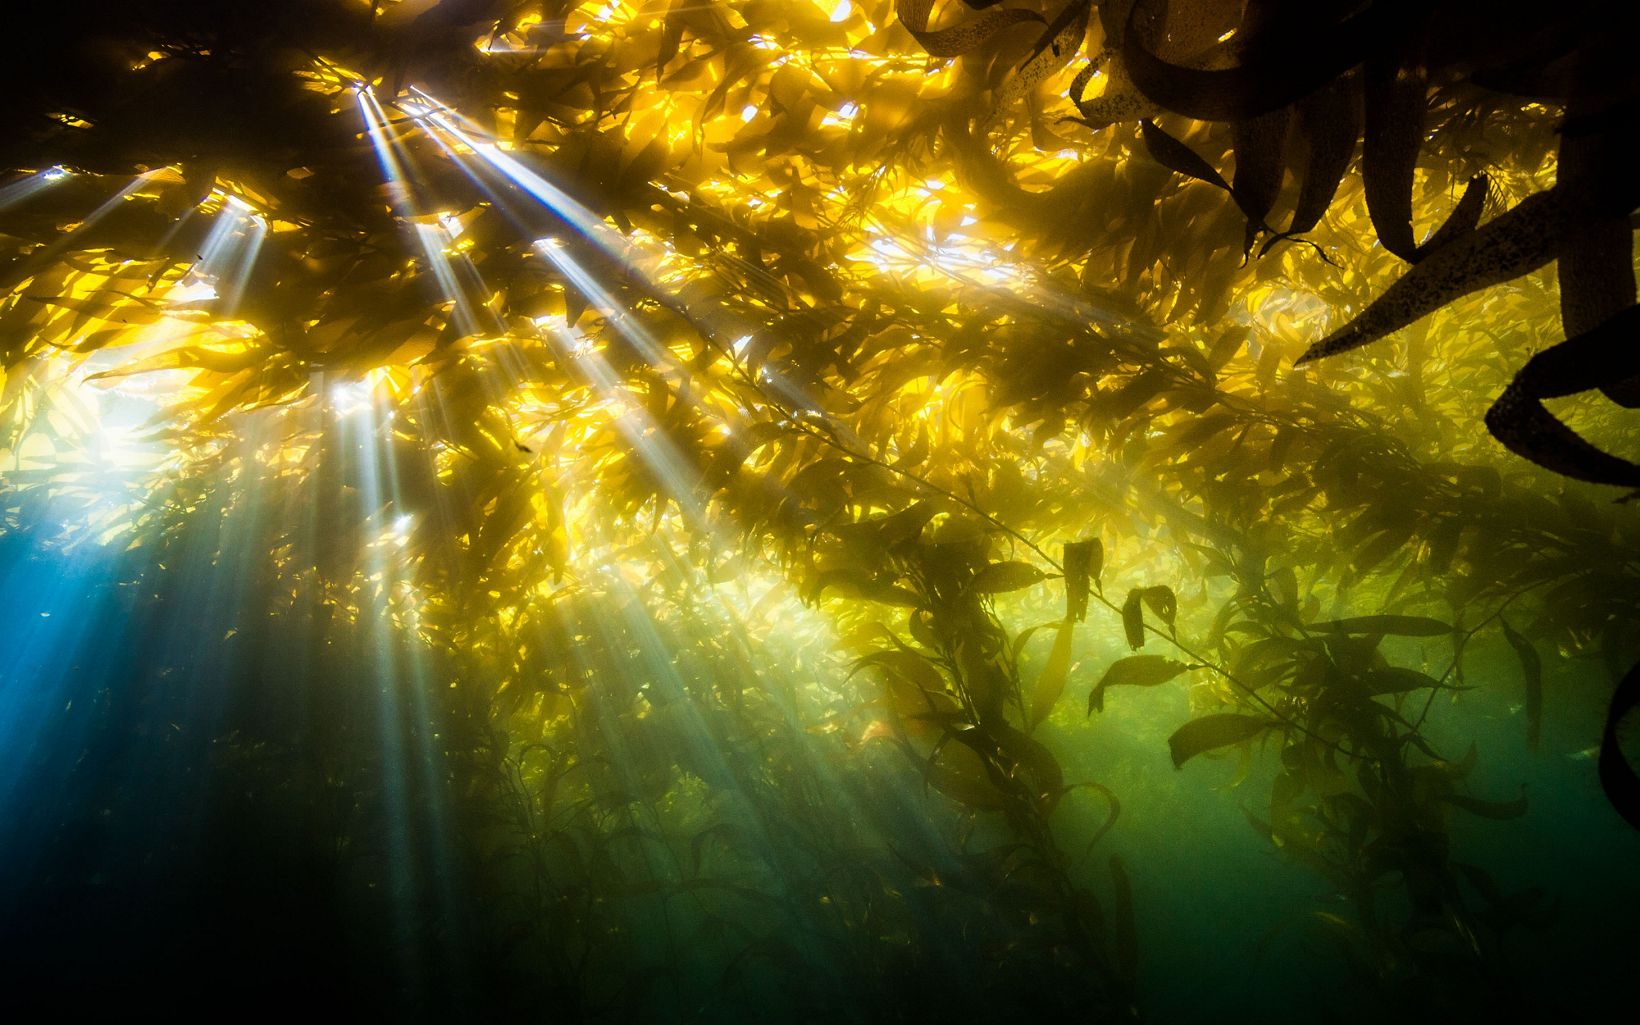 Underwater photo looking up as sun streams through kelp plants from the surface.